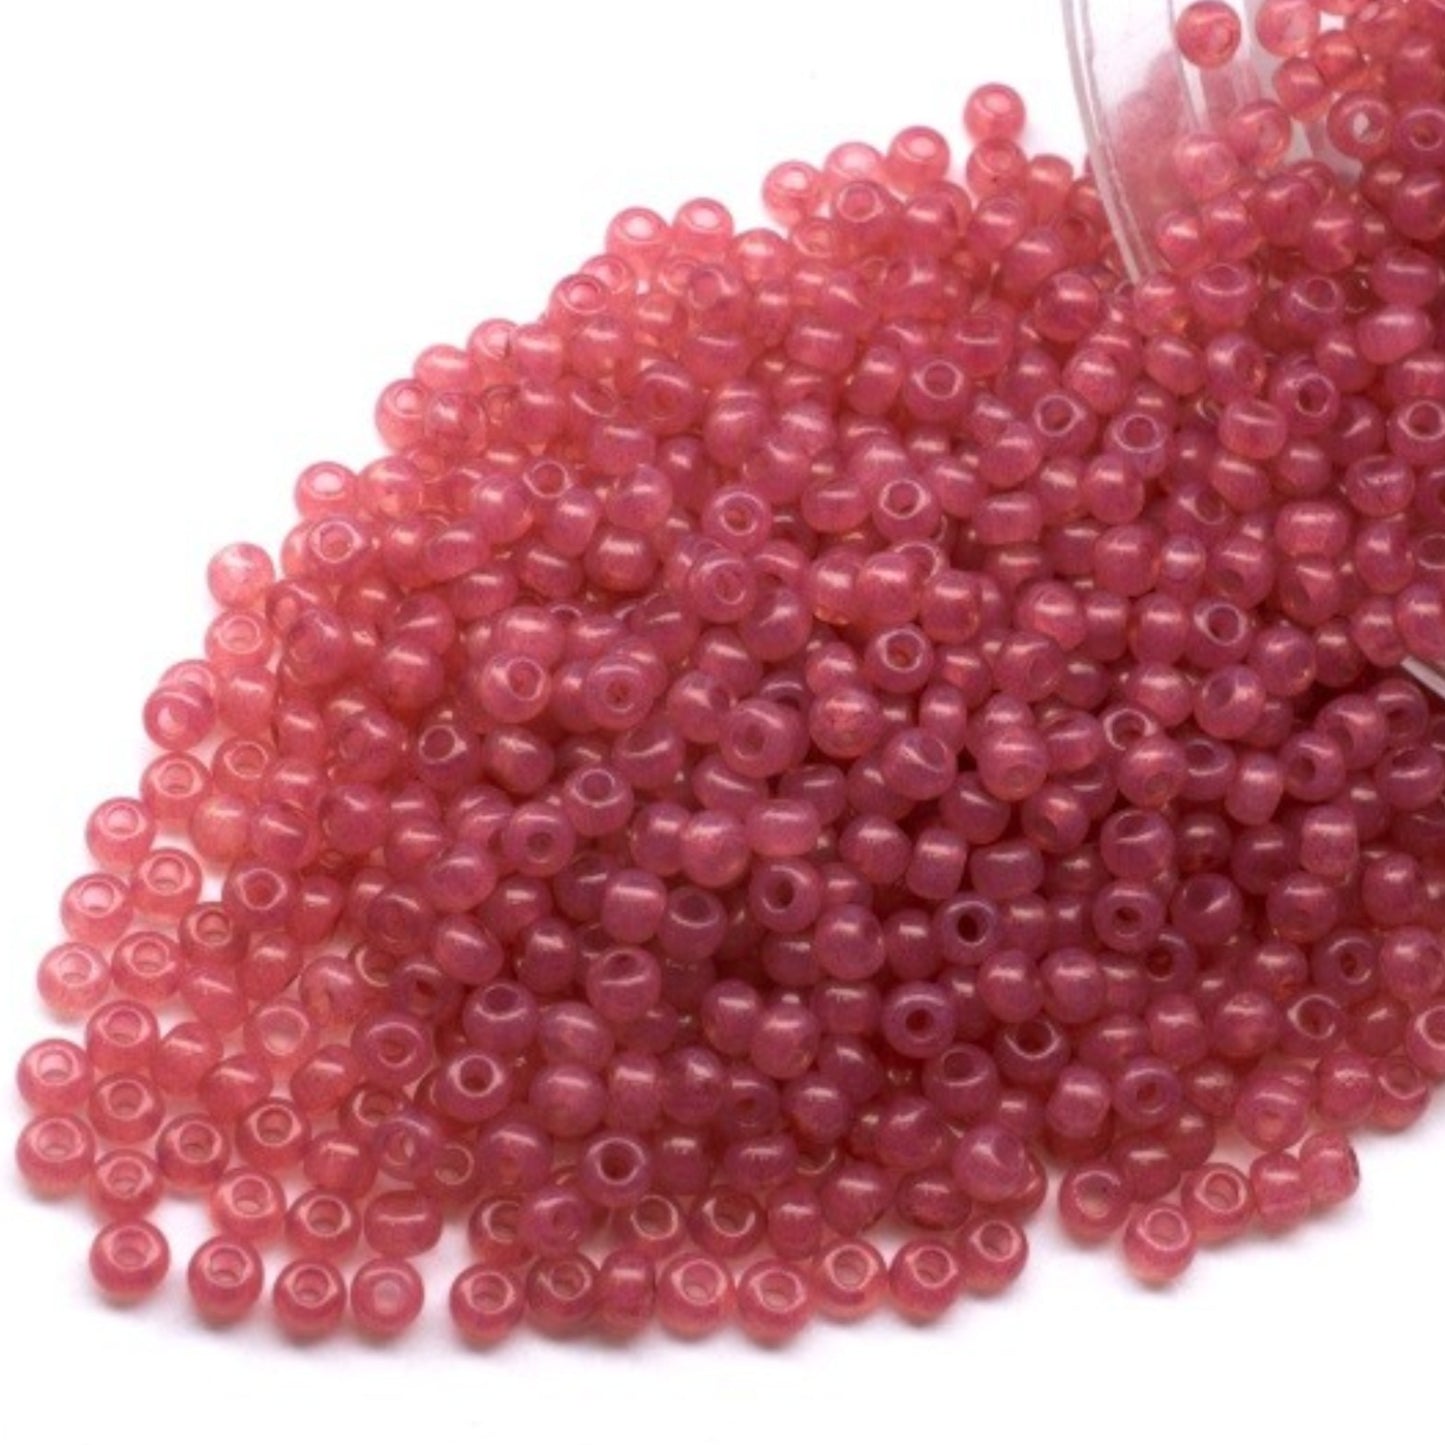 02693 Czech seed beads PRECIOSA round 10/0 lilac pink. Alabaster - Solgel Dyed.